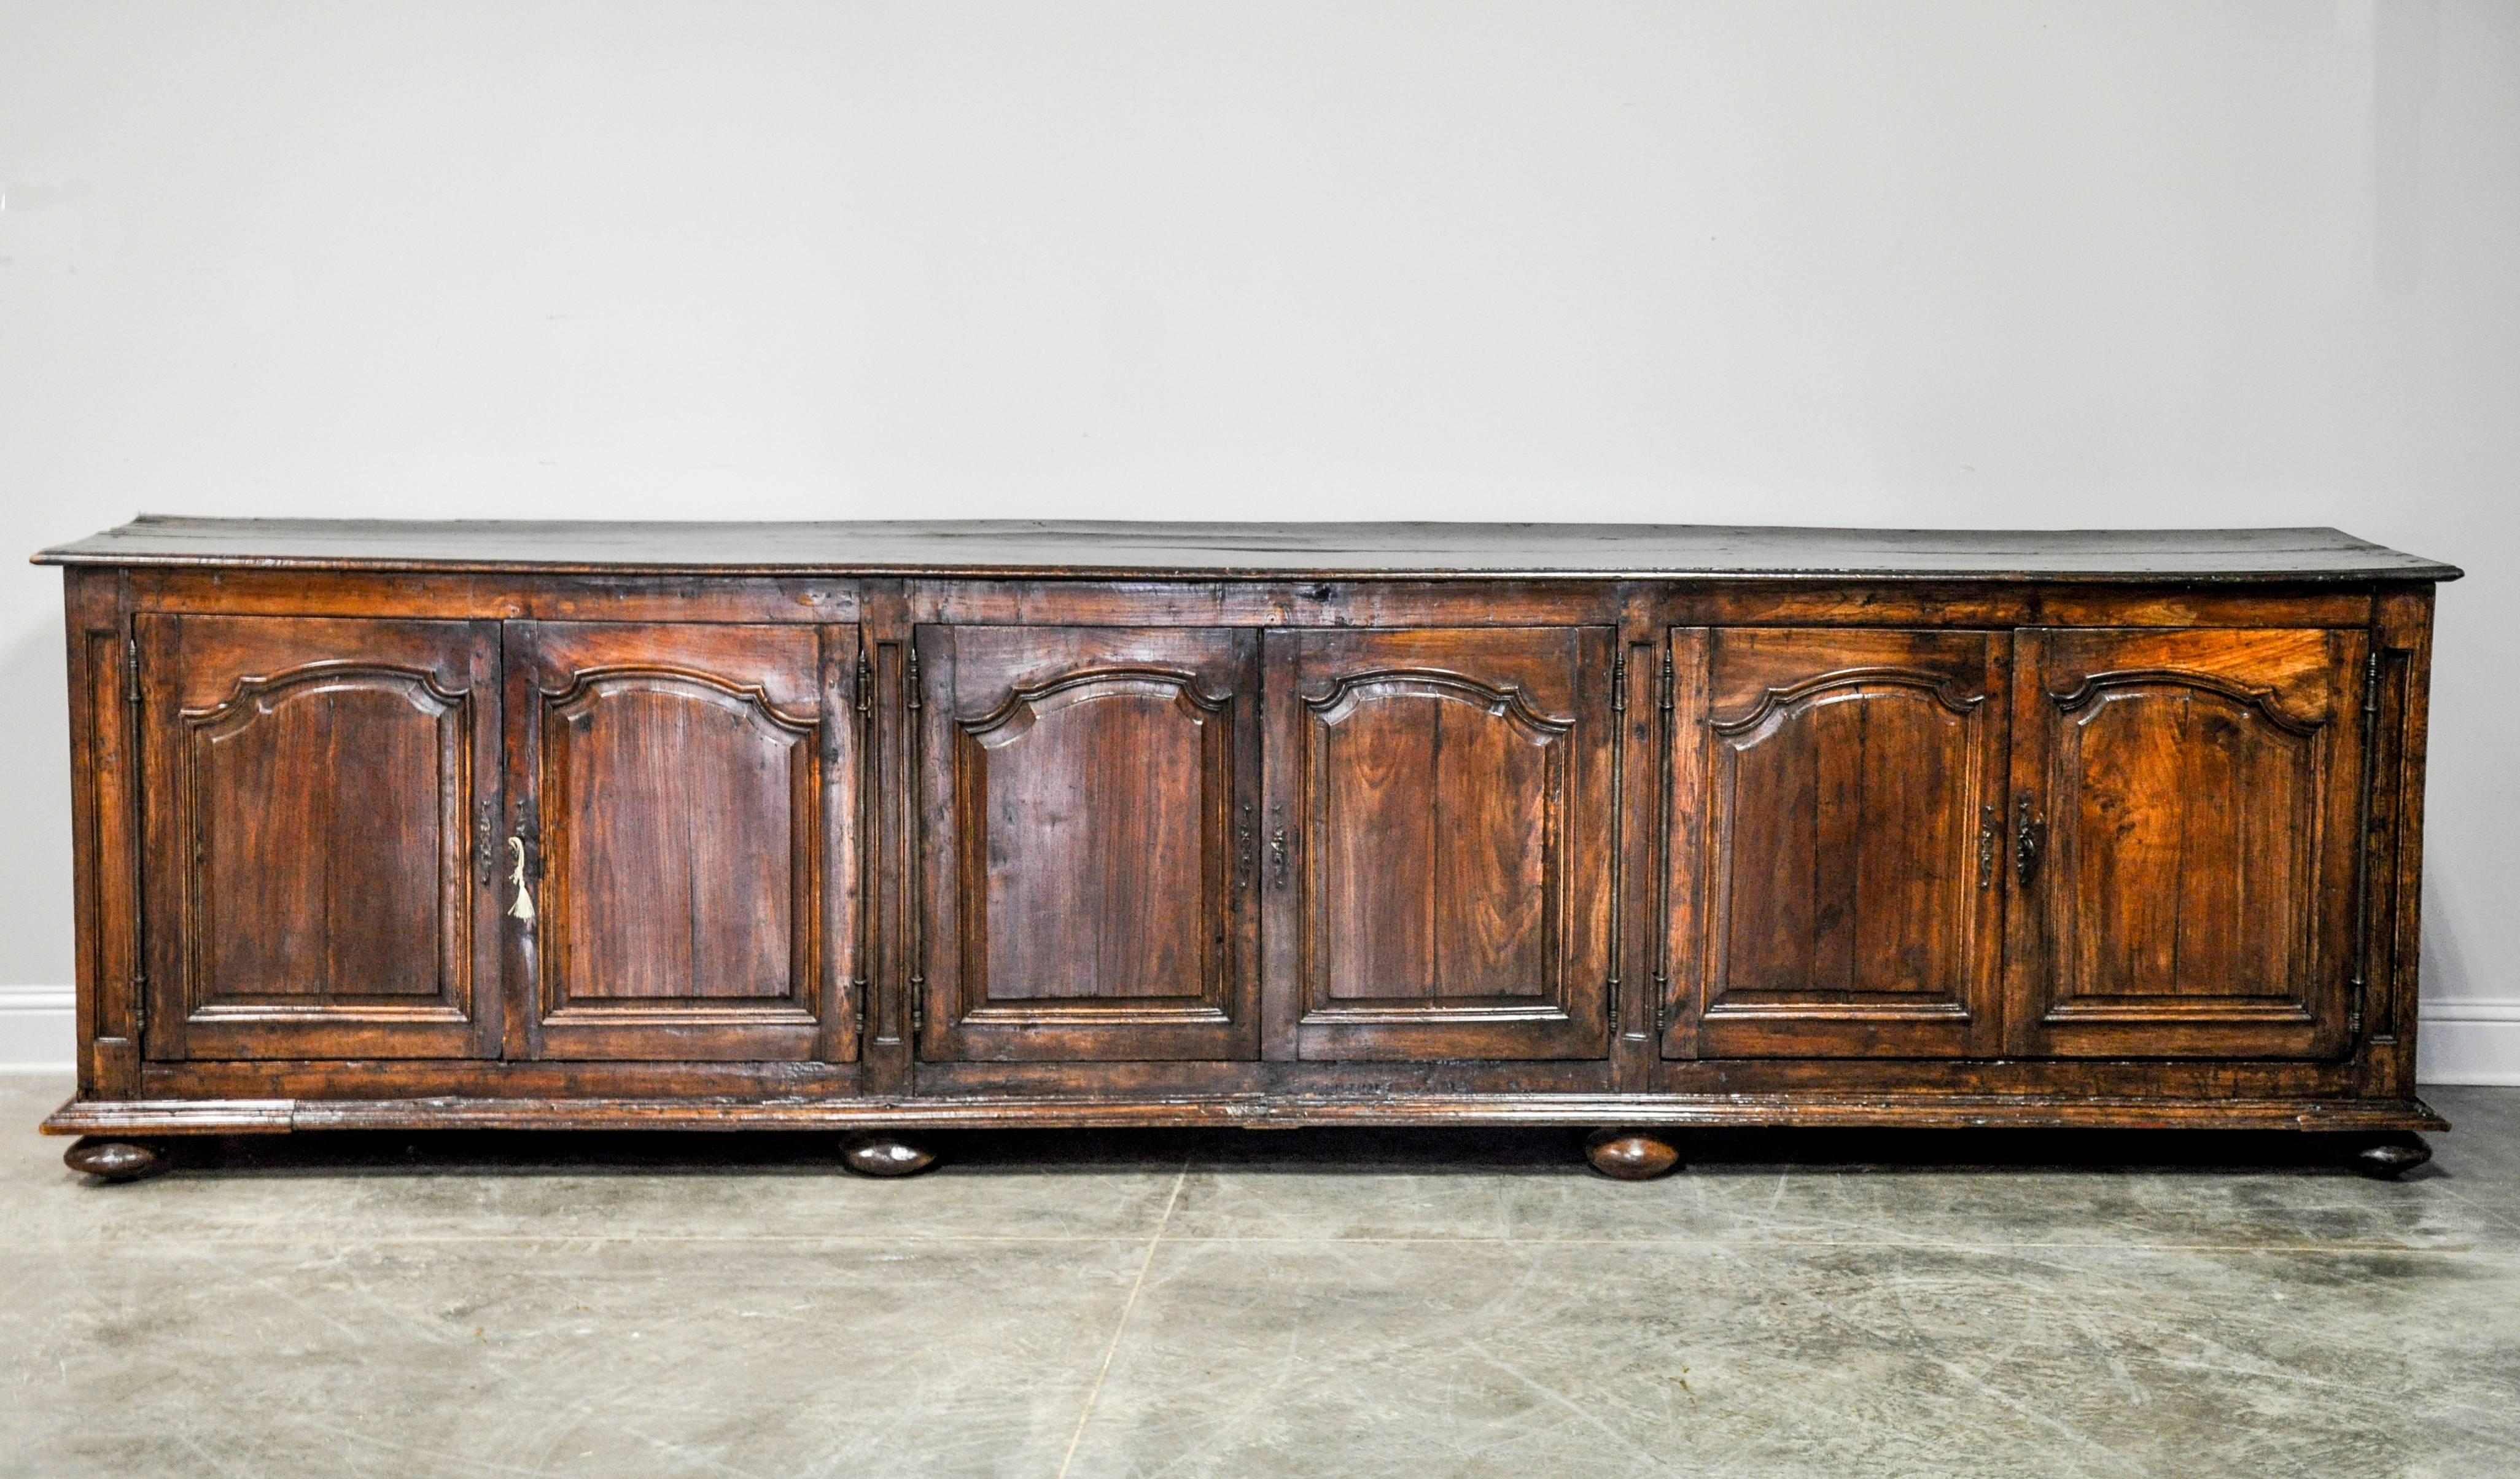 Remarkable 19th century Louis XIII transitional Louis XIV style enfilade in walnut. Six doors open to three large cabinets each with a single, original shelf complete. Original backing and hardware with lock and key mechanism completes this